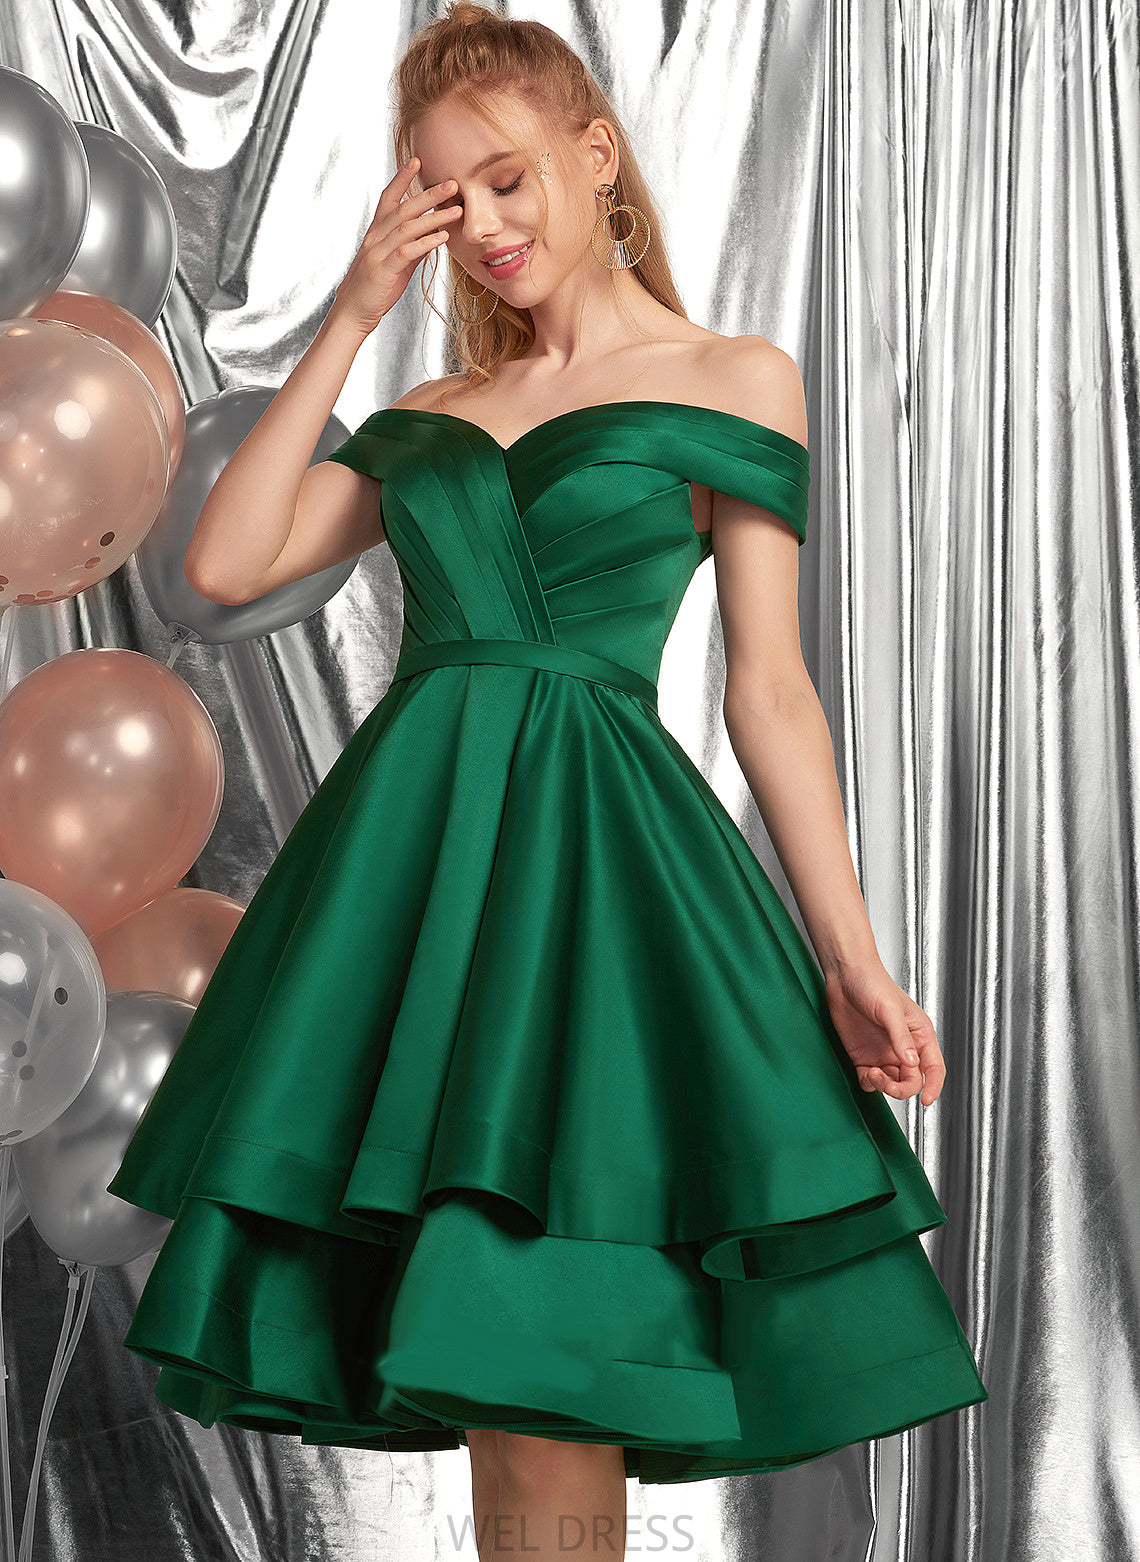 With Homecoming Dresses Knee-Length Ruffle Aubrey Satin Dress Homecoming A-Line Off-the-Shoulder